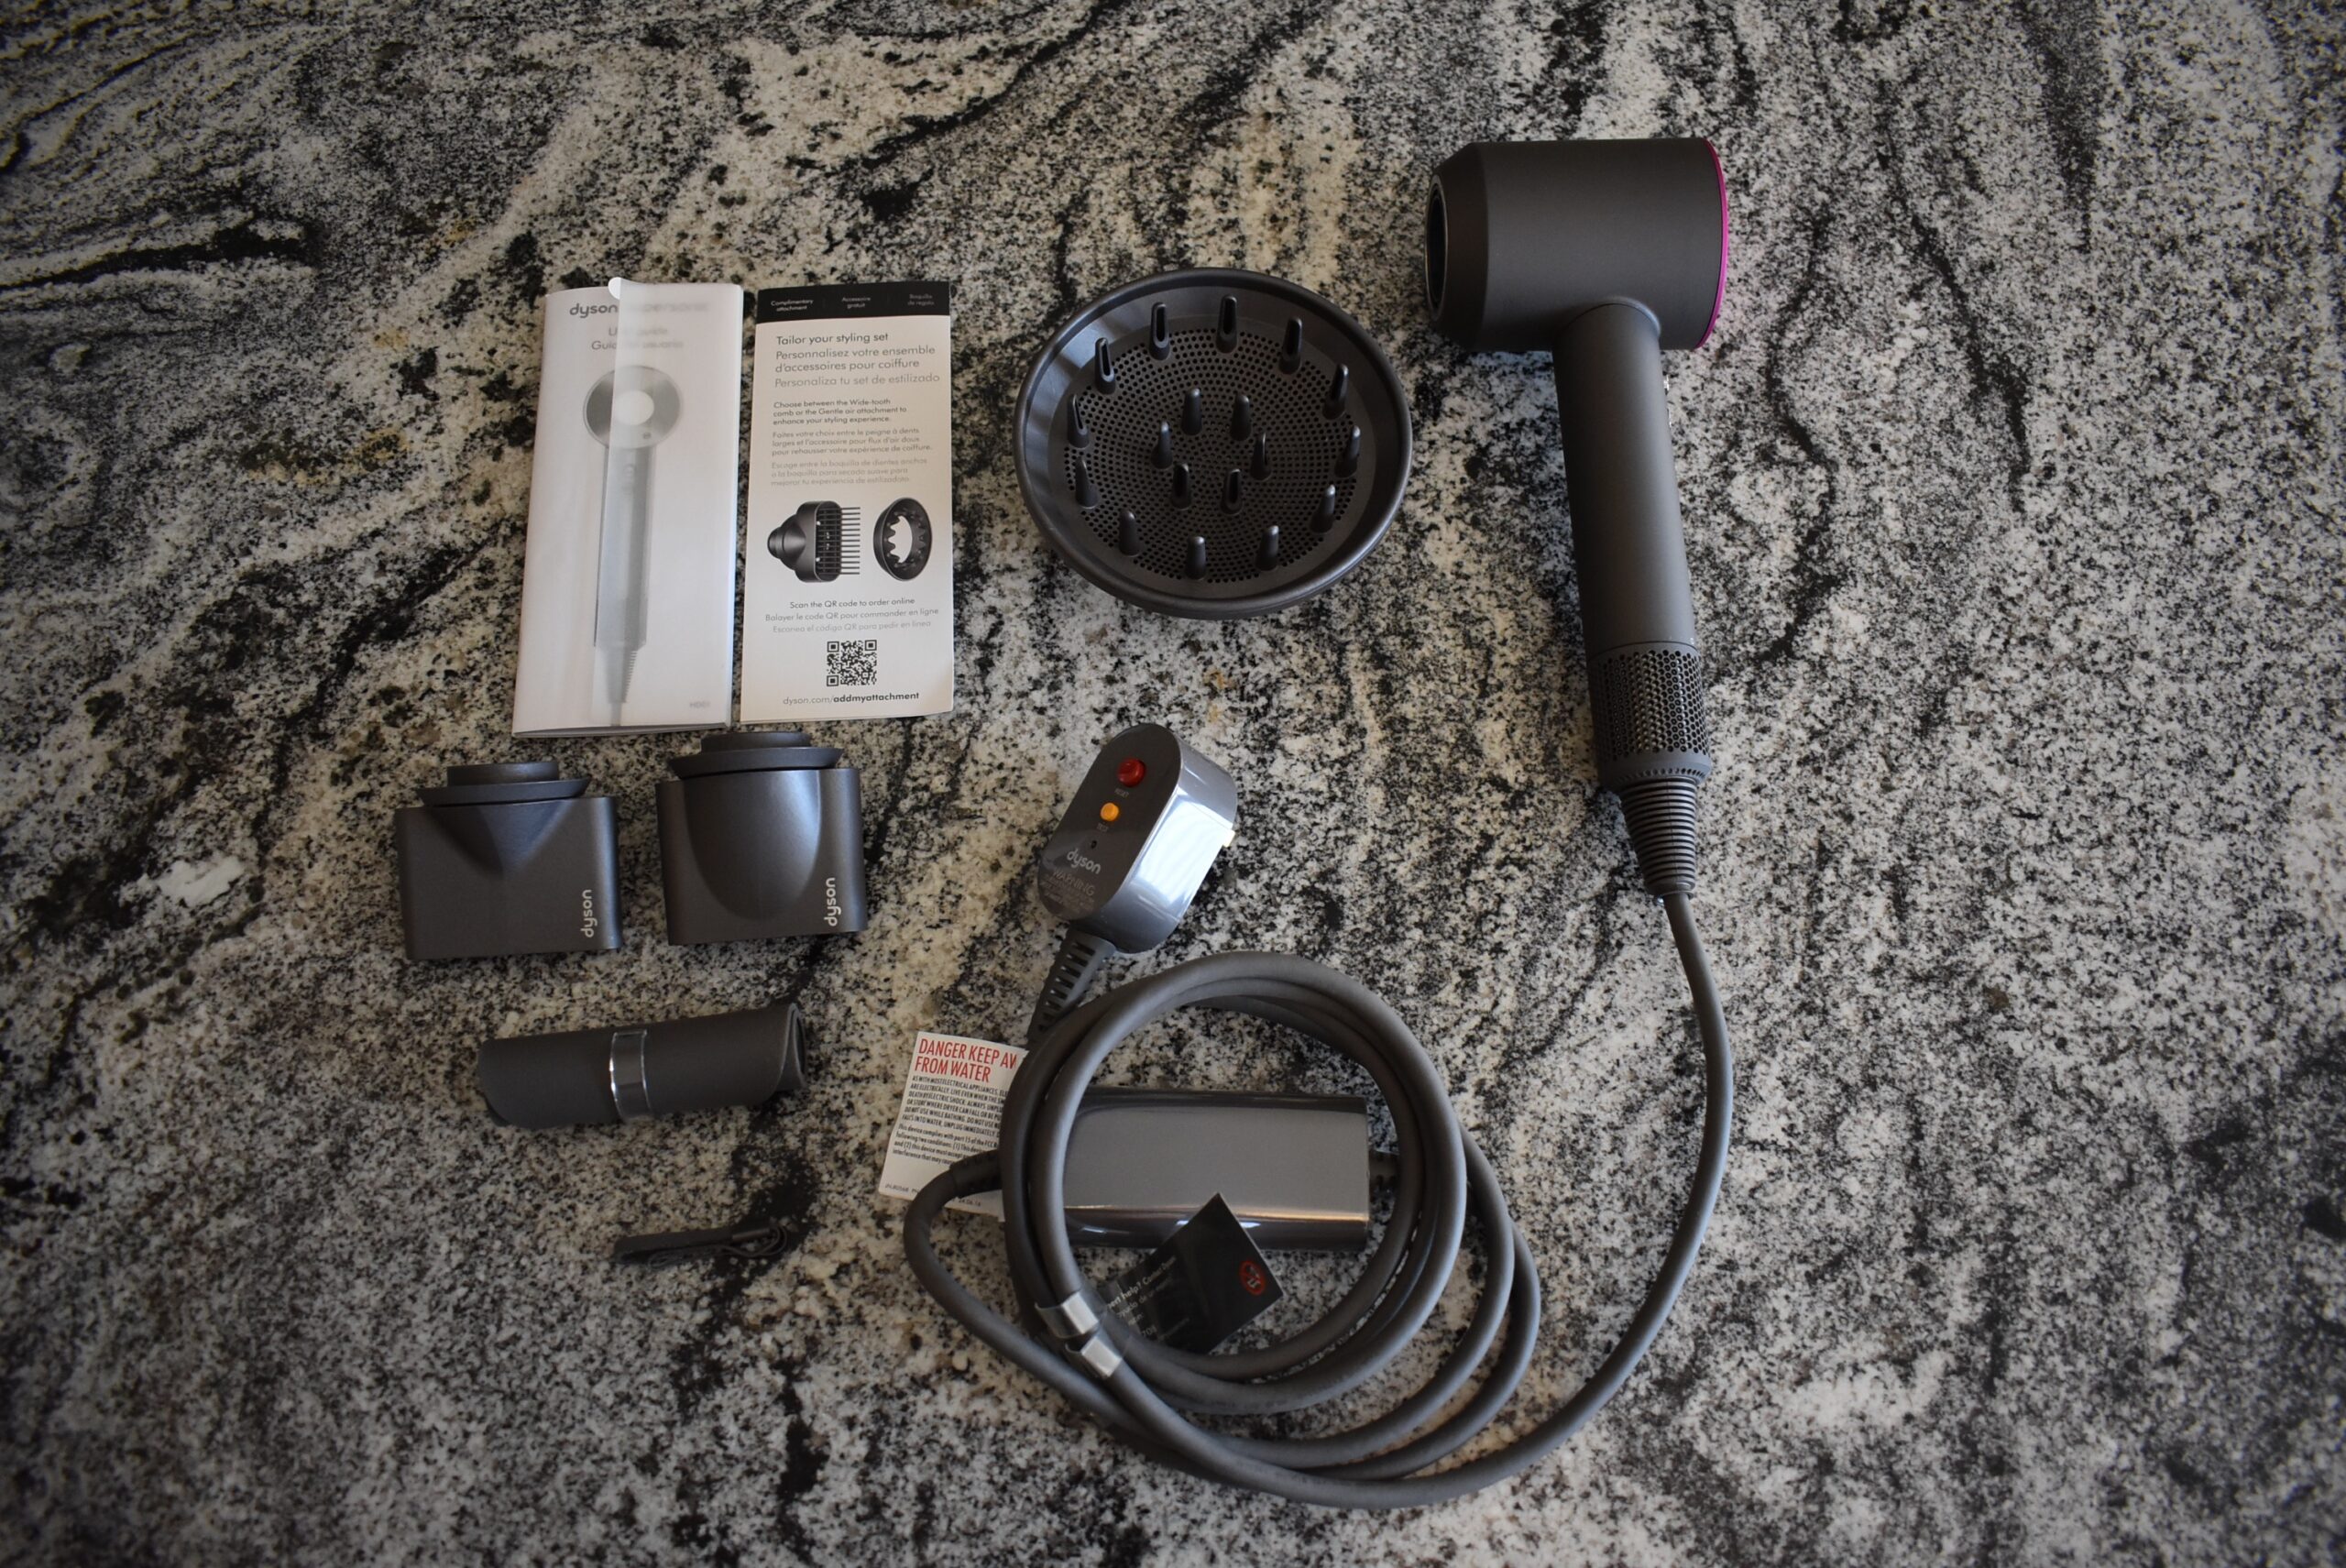 All of the Dyson hair dryer contents unpacked as part of a product review